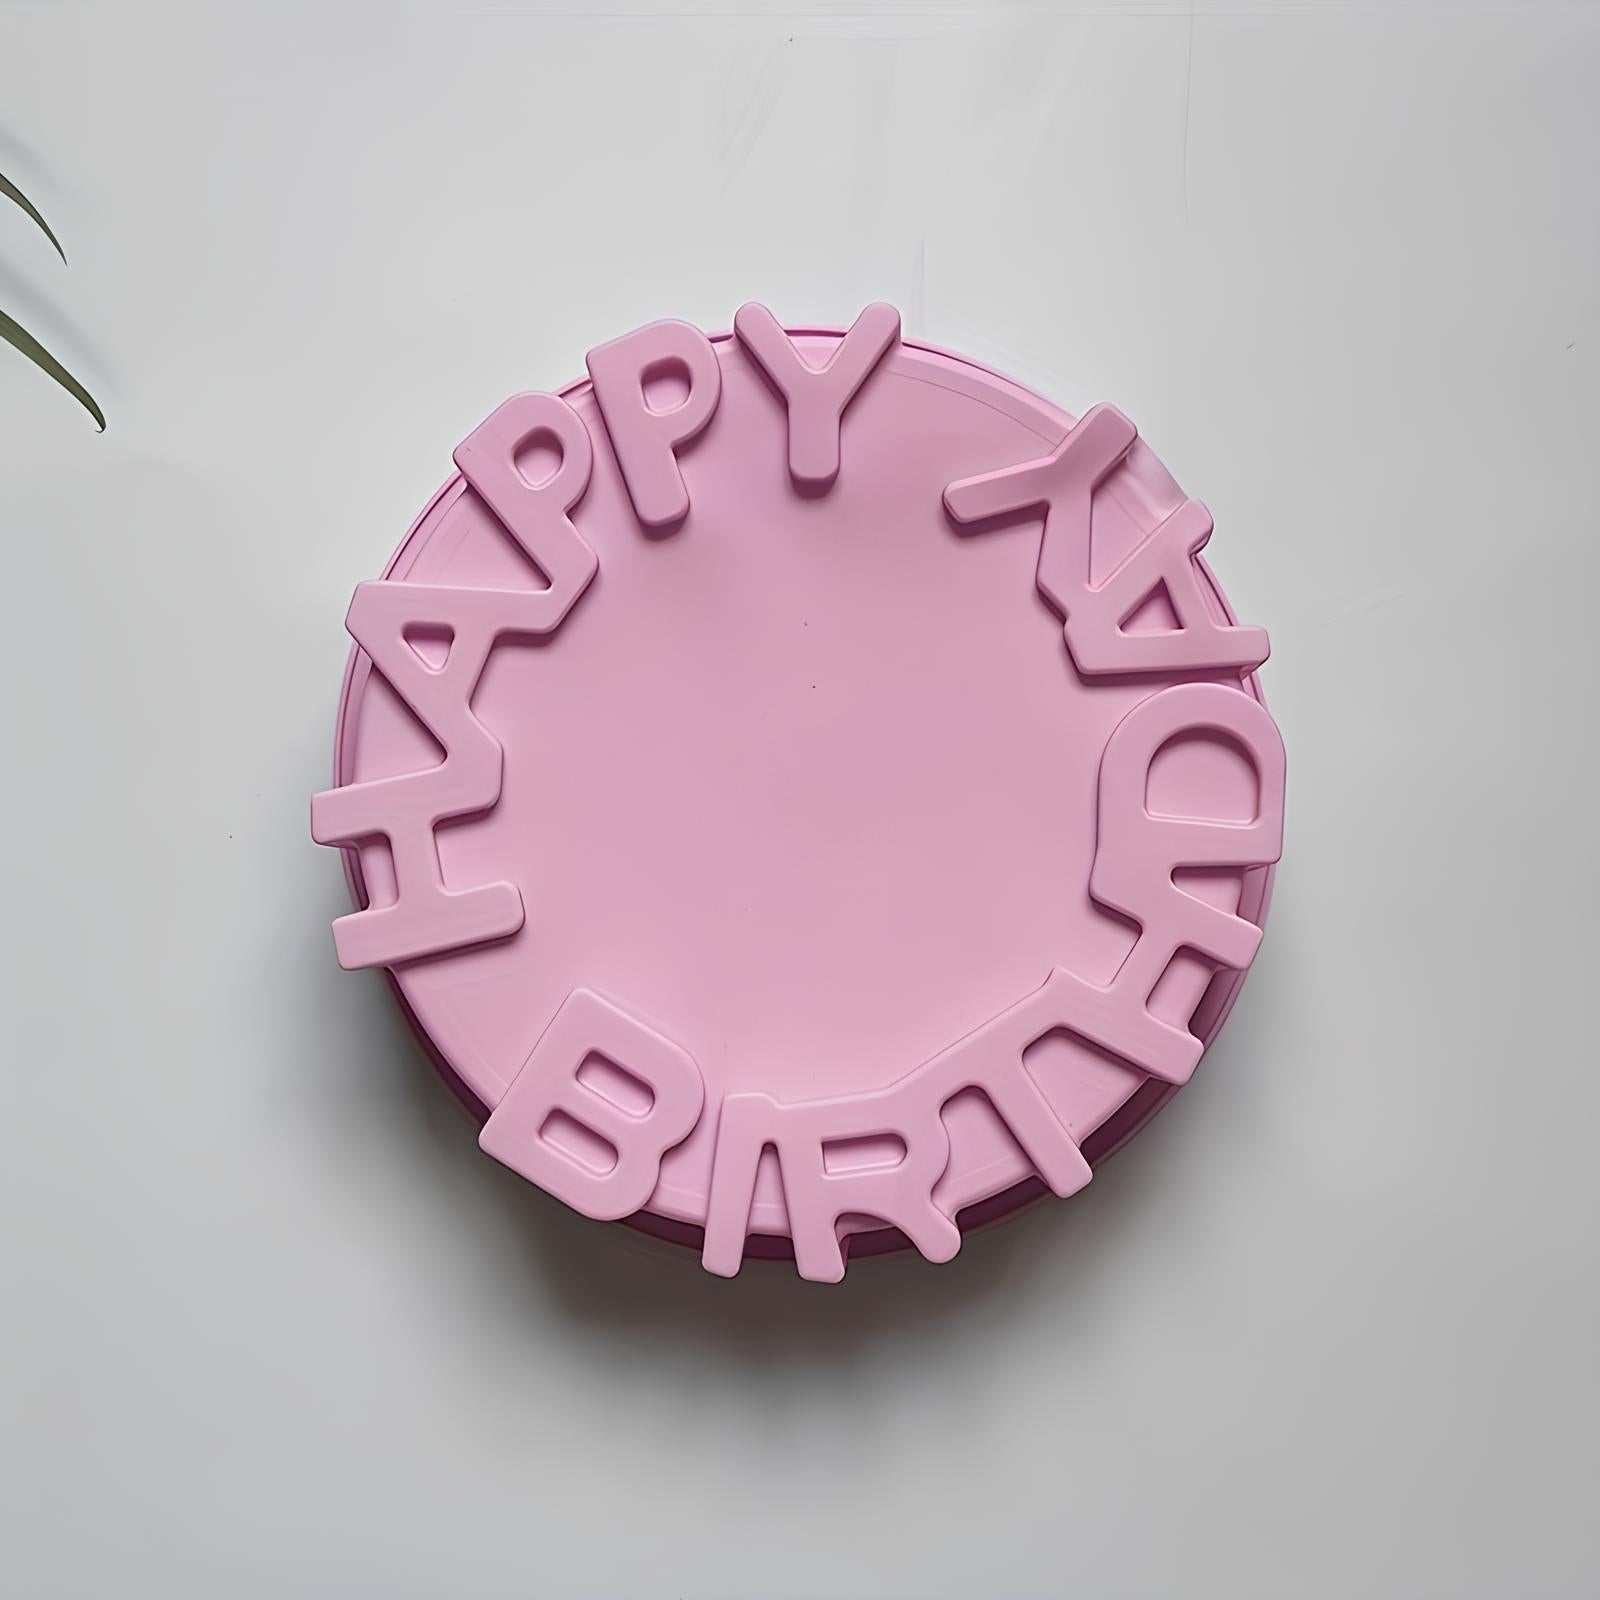 Moule à gâteau en silicone - Happy Birthday - UstensilesCulinaires